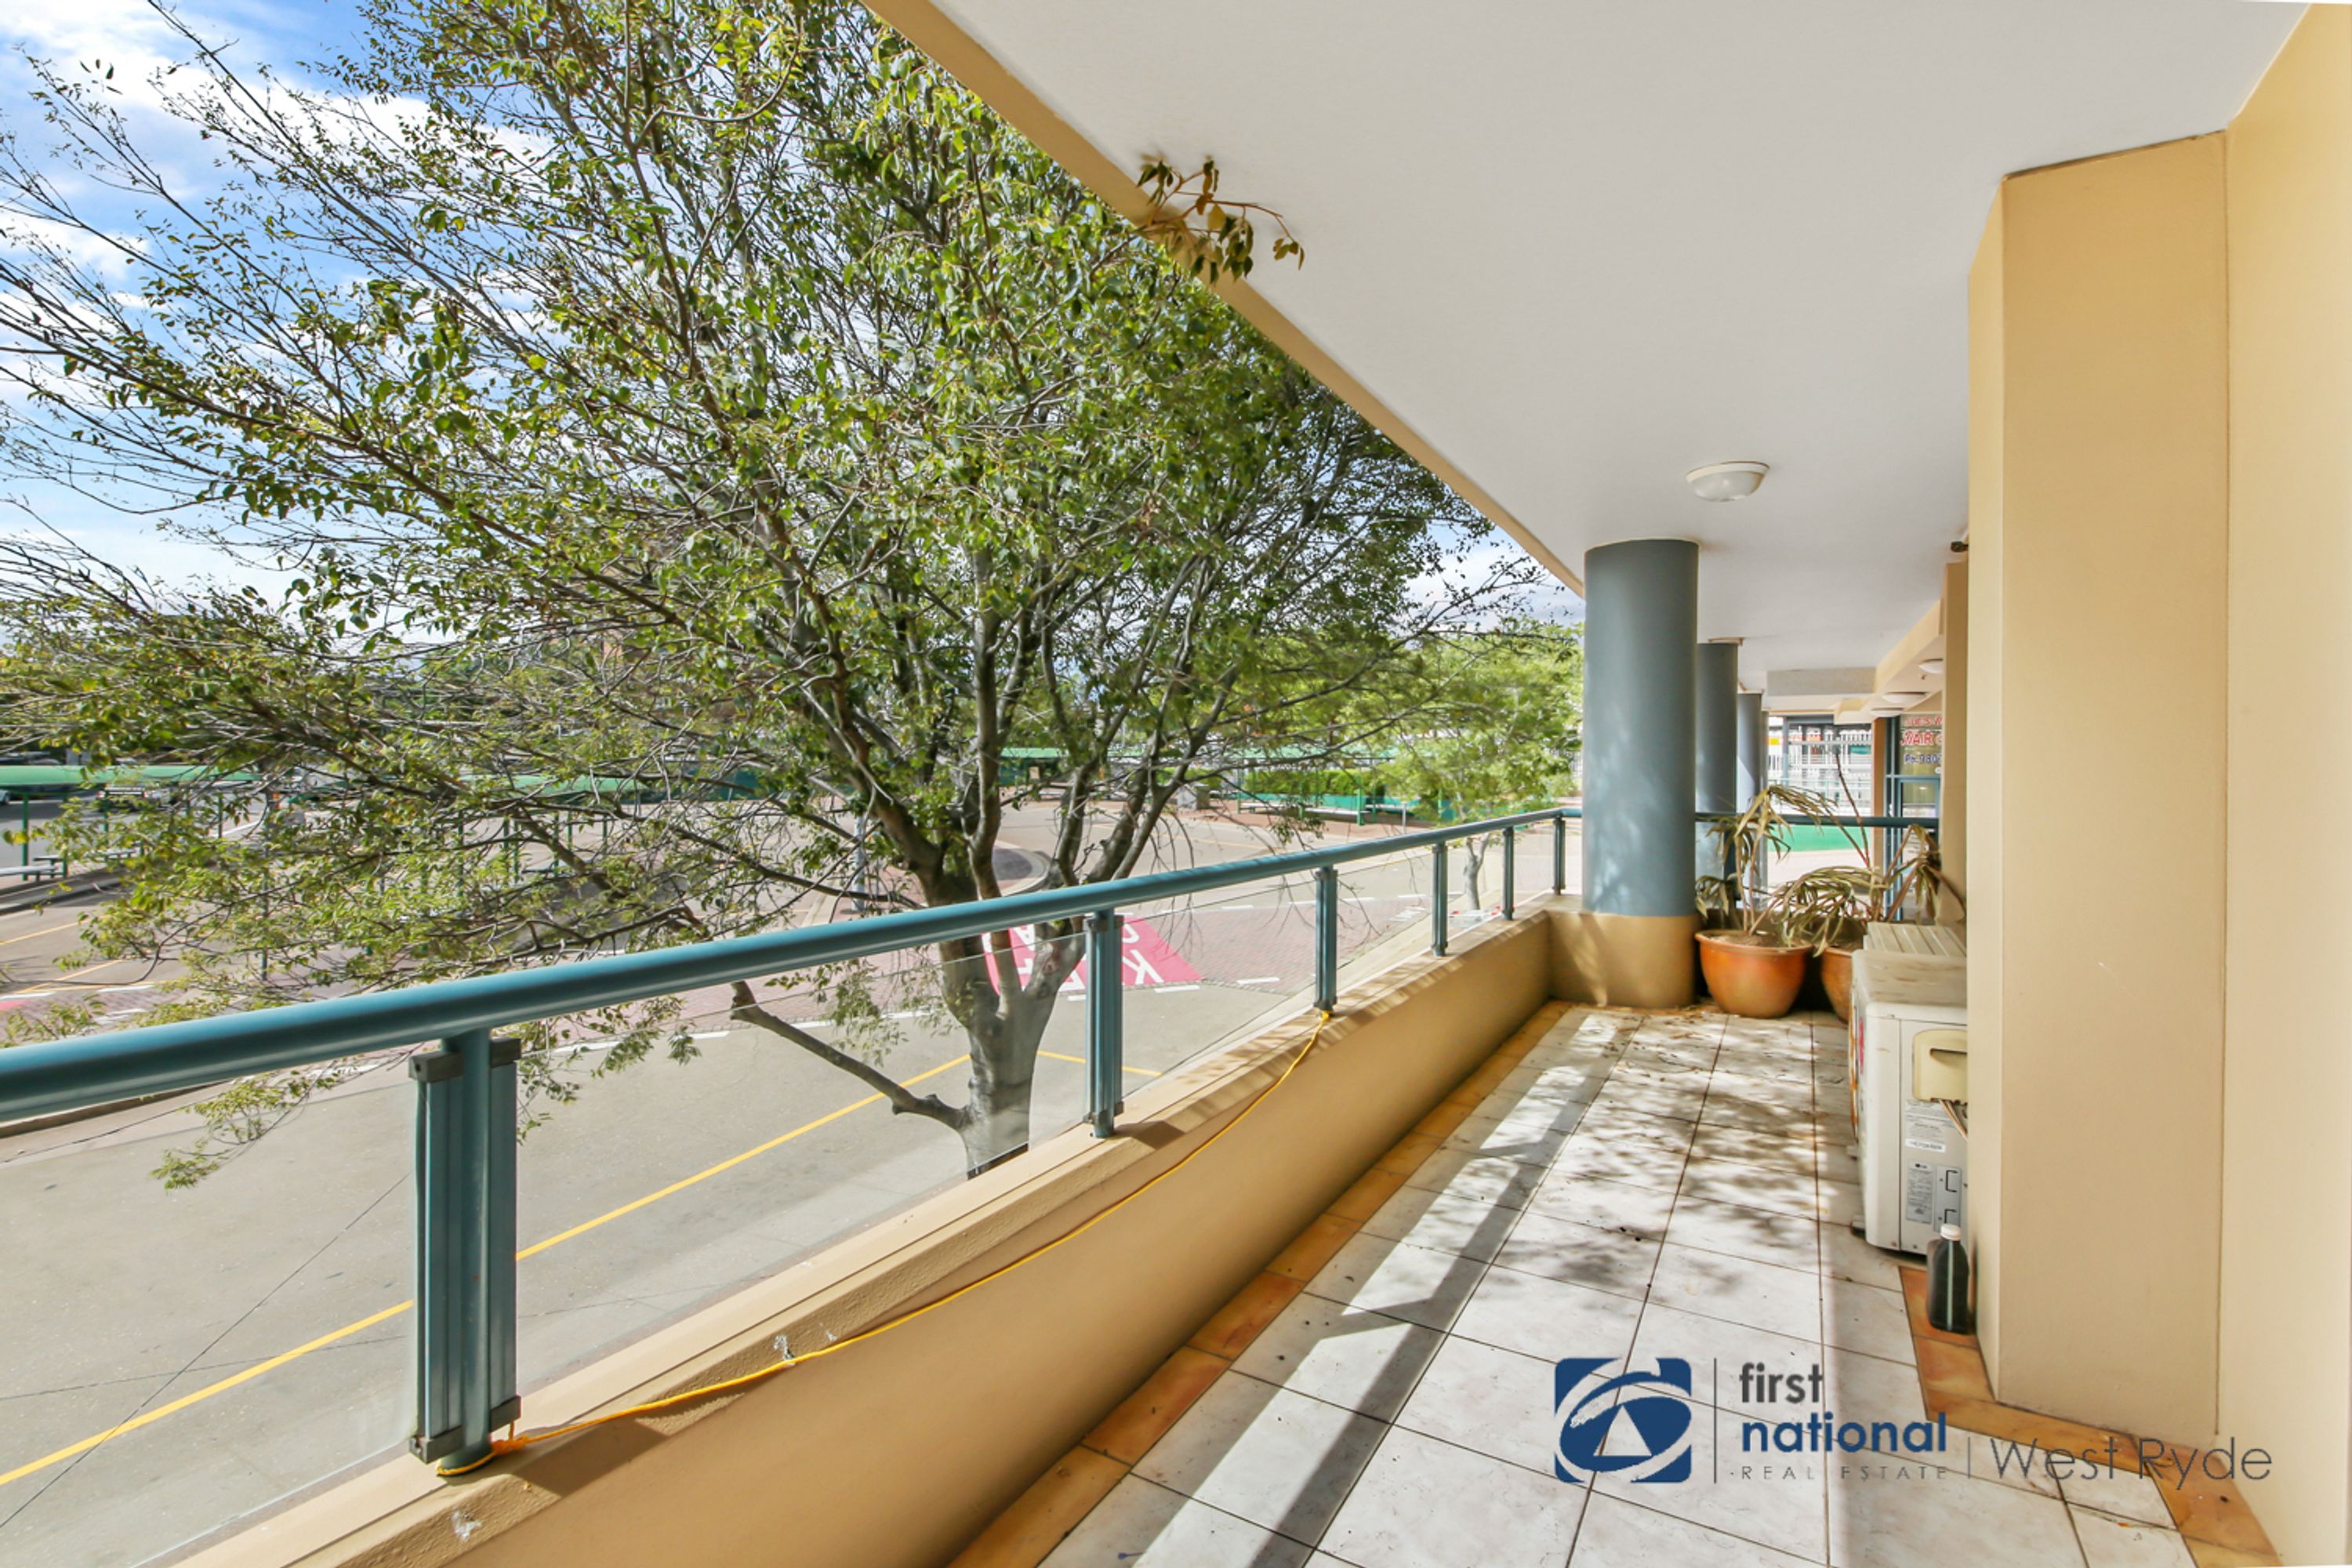 15/1-55 West Parade, West Ryde, NSW 2114